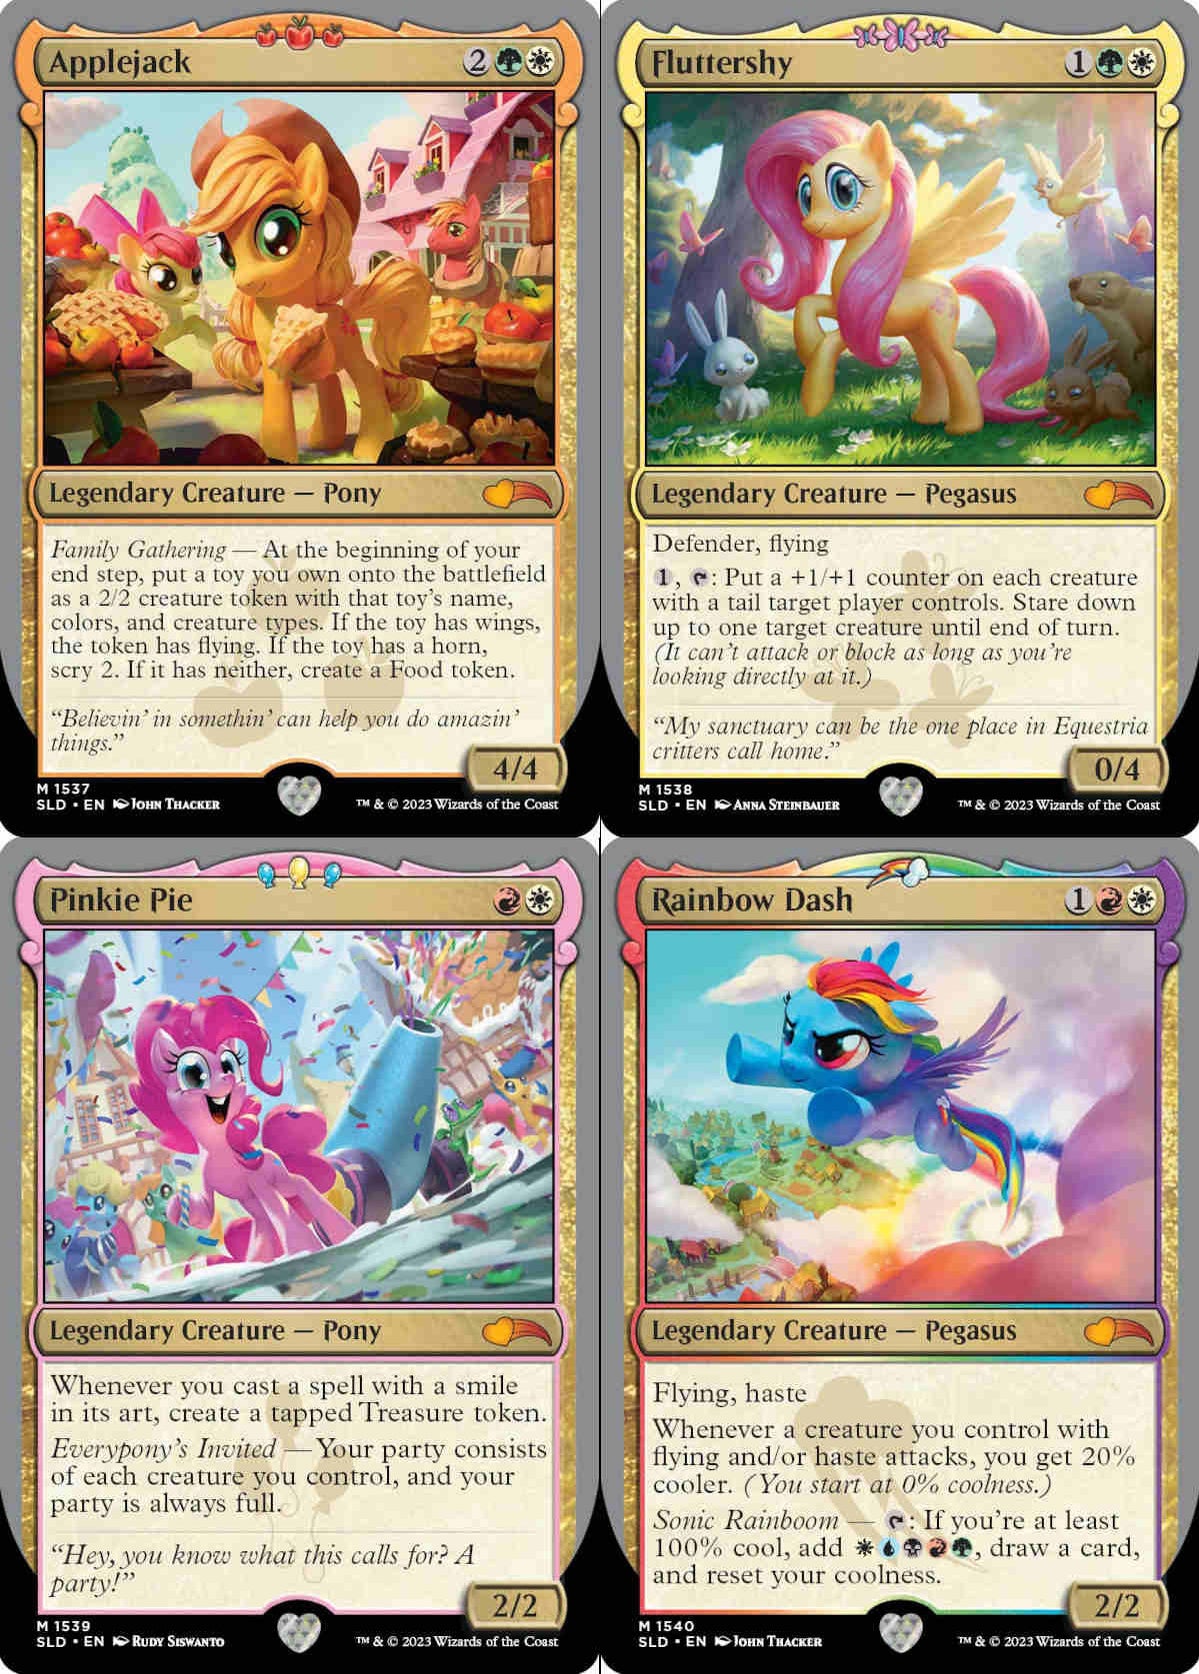 ponies-the-galloping-2-extra-life-2023-cards.jpg